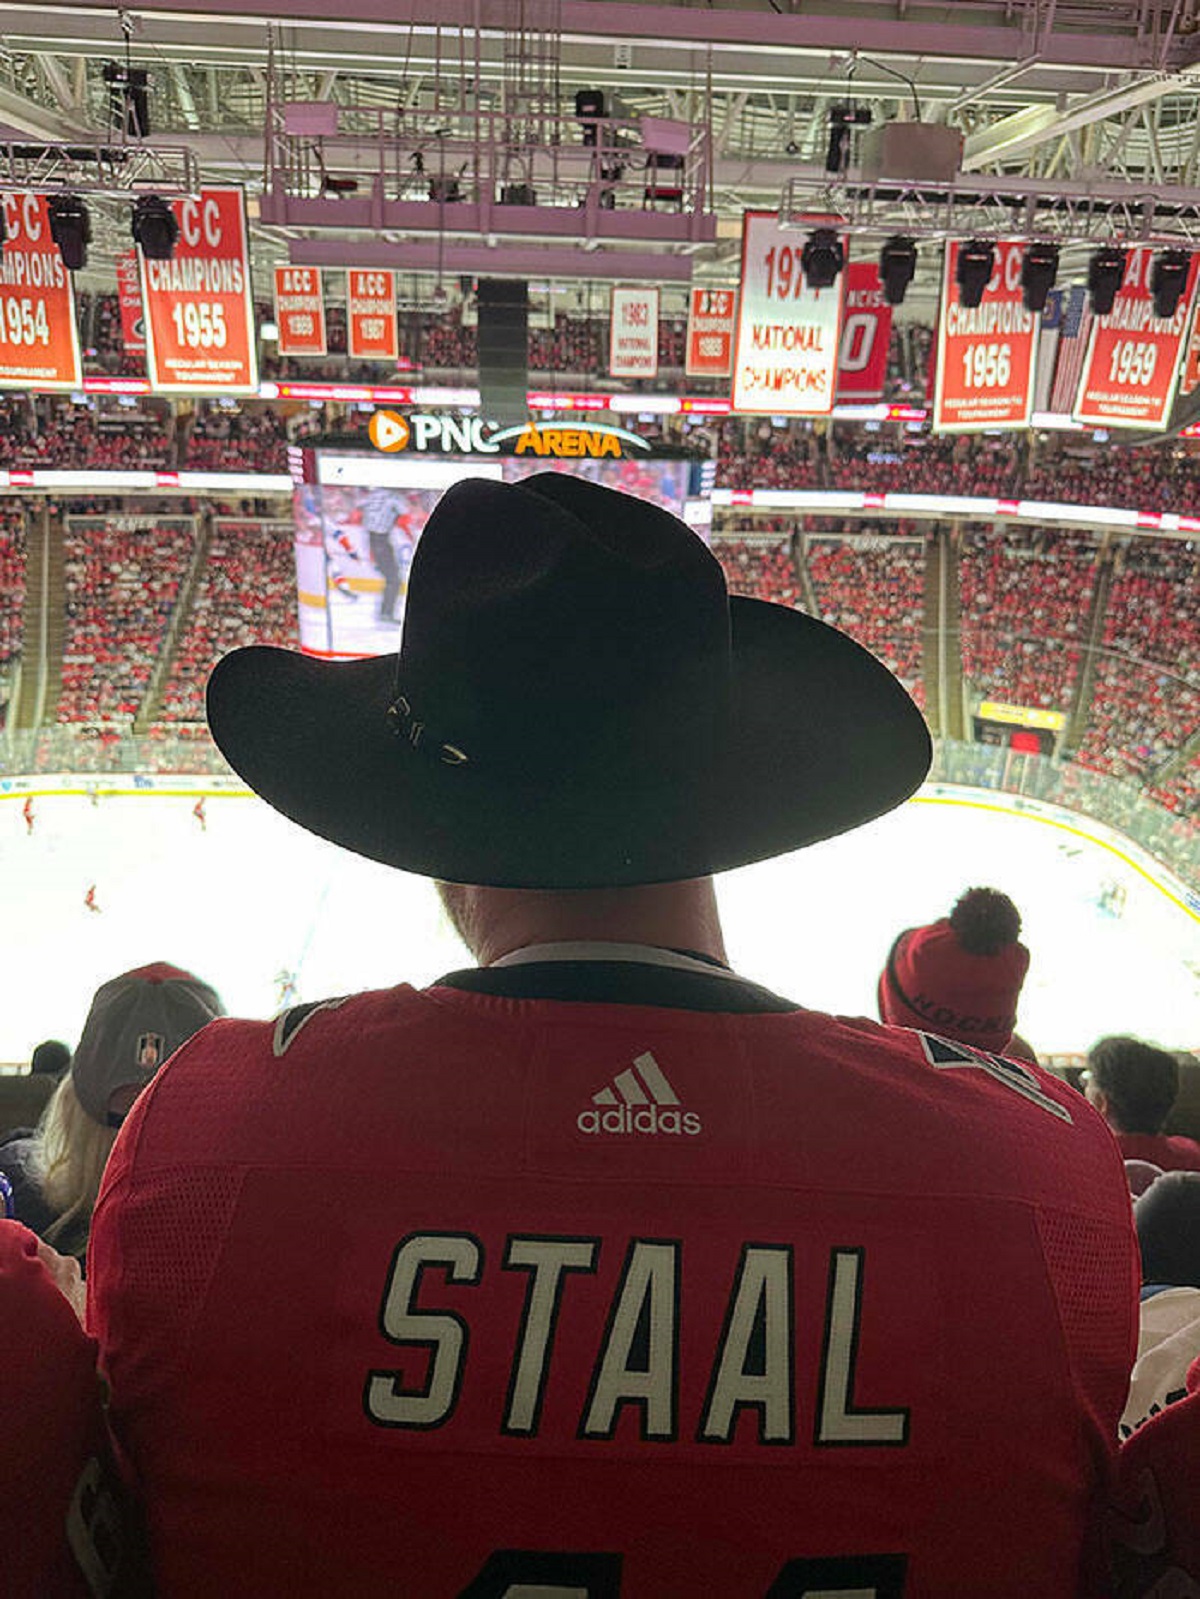 "Guy In Front Of Me Refused To Take Off His Hat After I Told Him It Was Blocking My View"